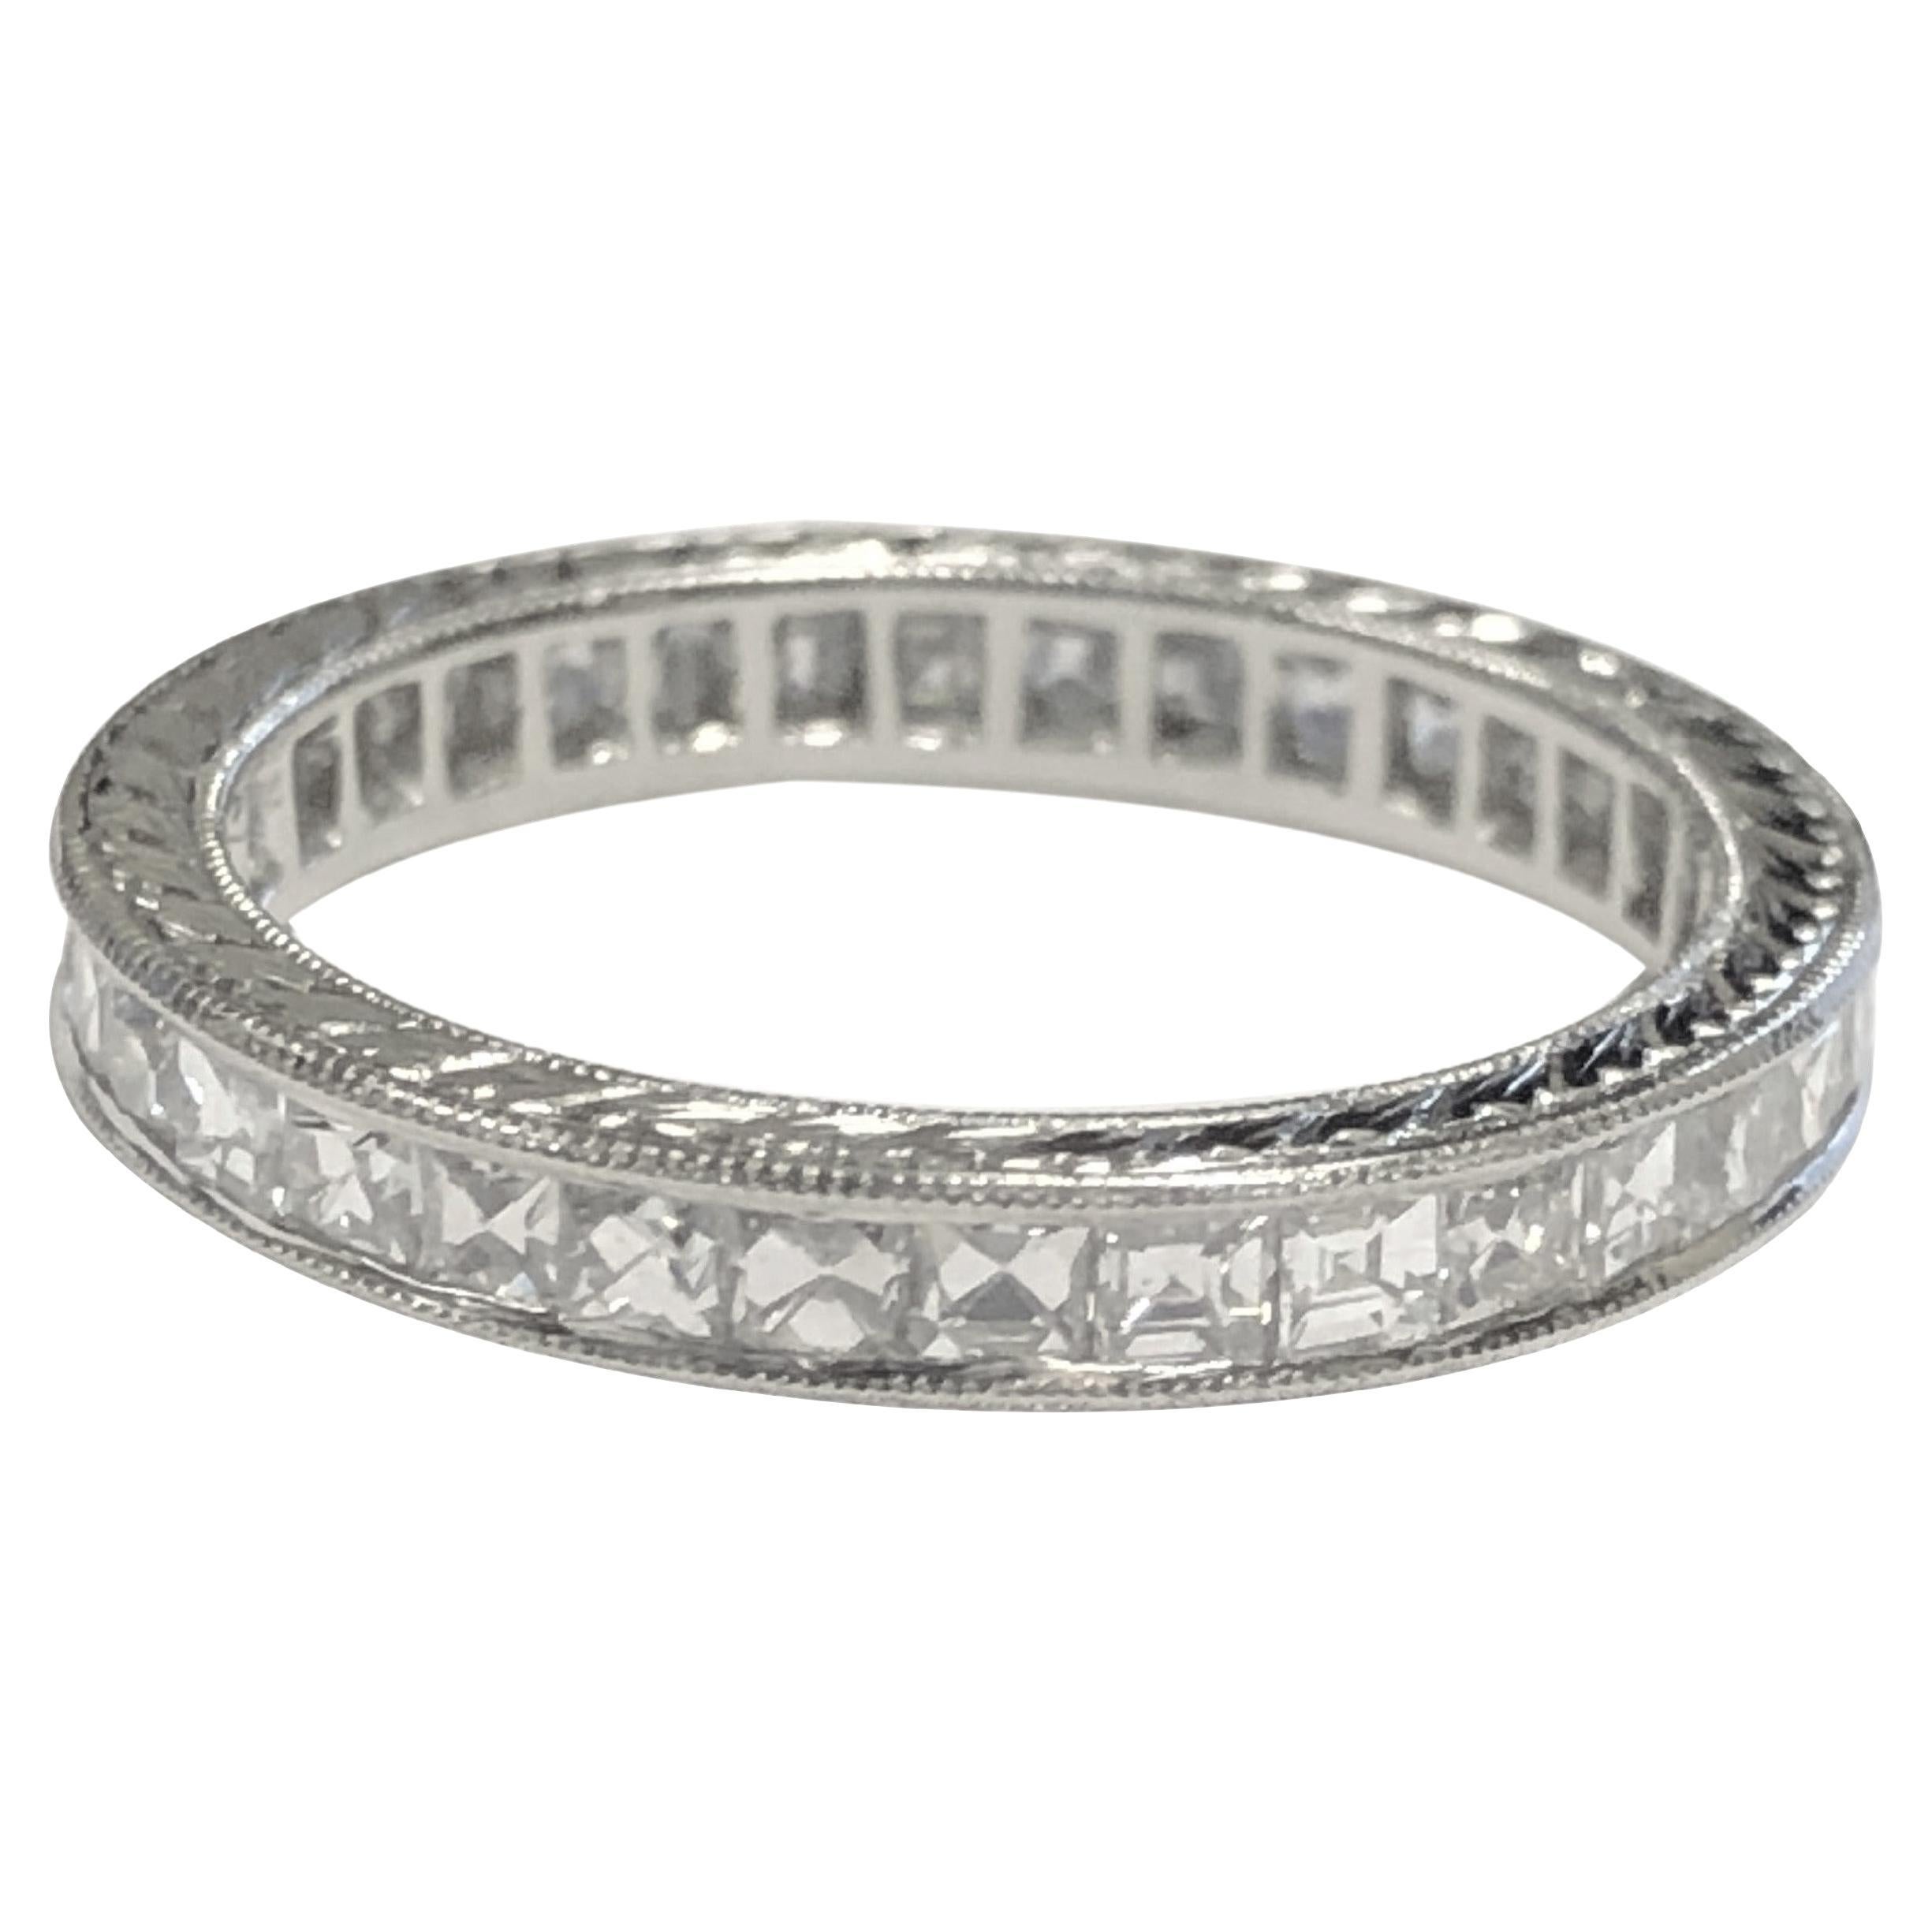 Antique French Cut Diamond and Platinum Eternity Band Ring